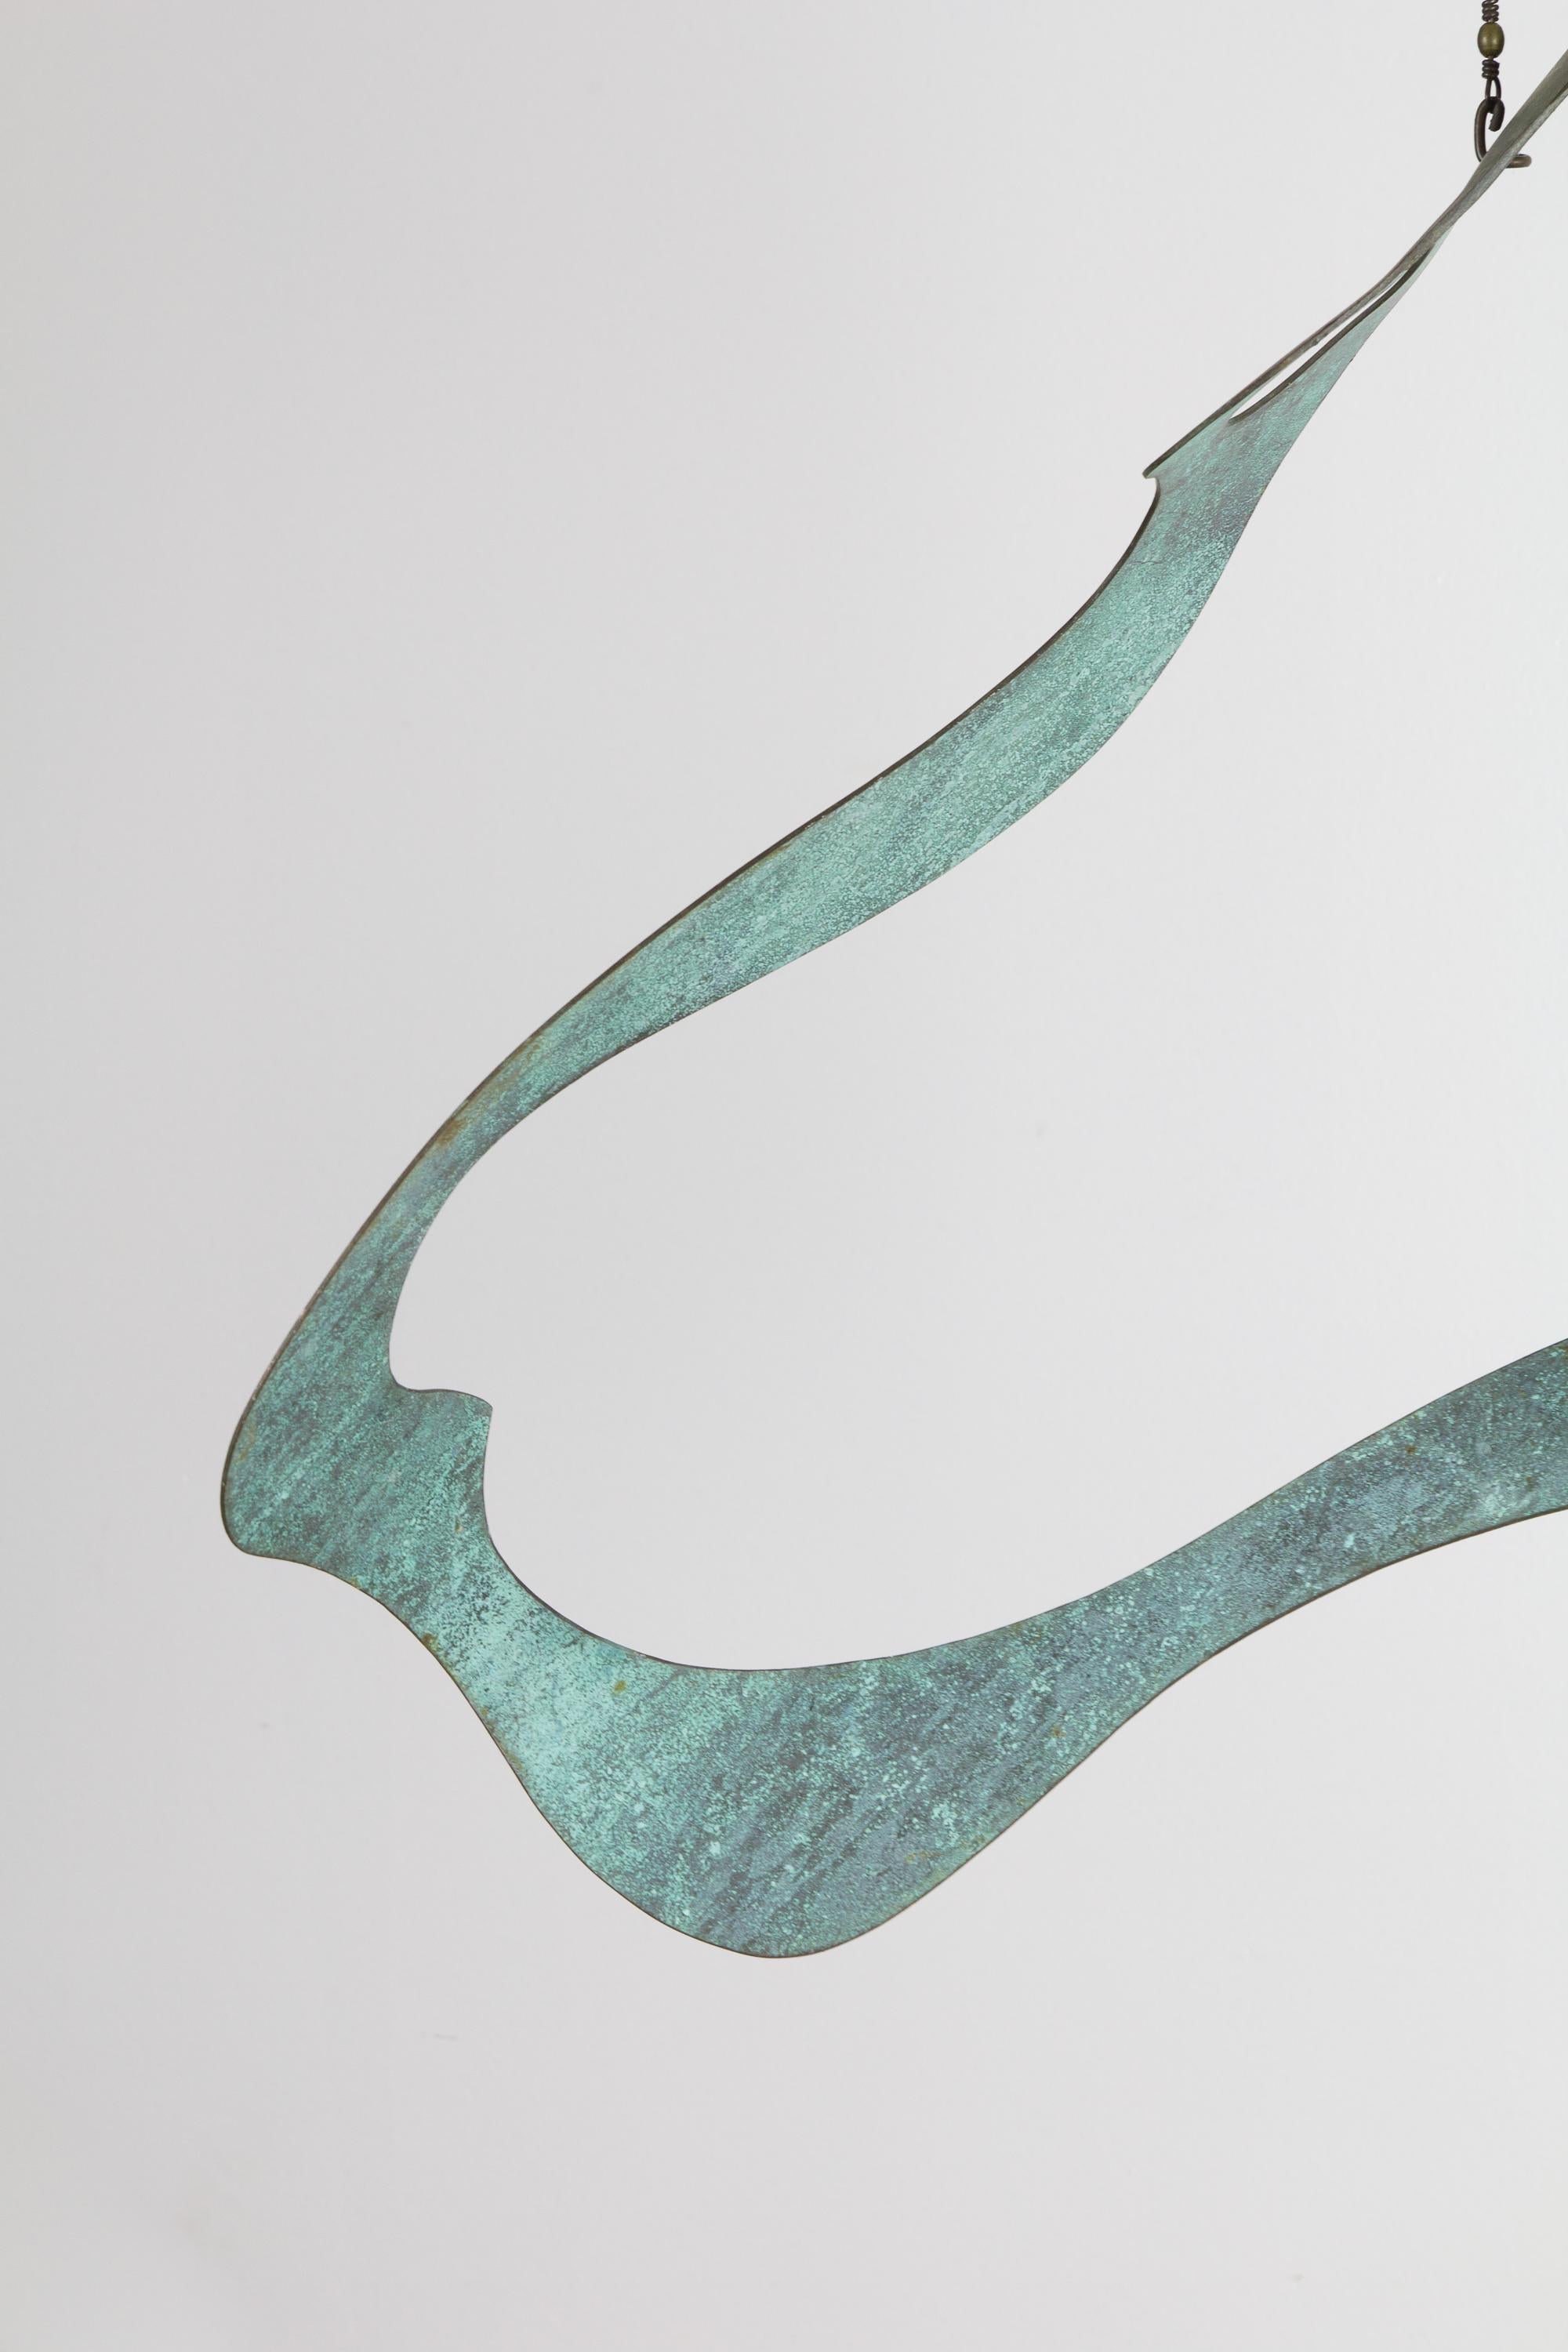 Patinated Biomorphic Bronze Hanging Sculpture For Sale